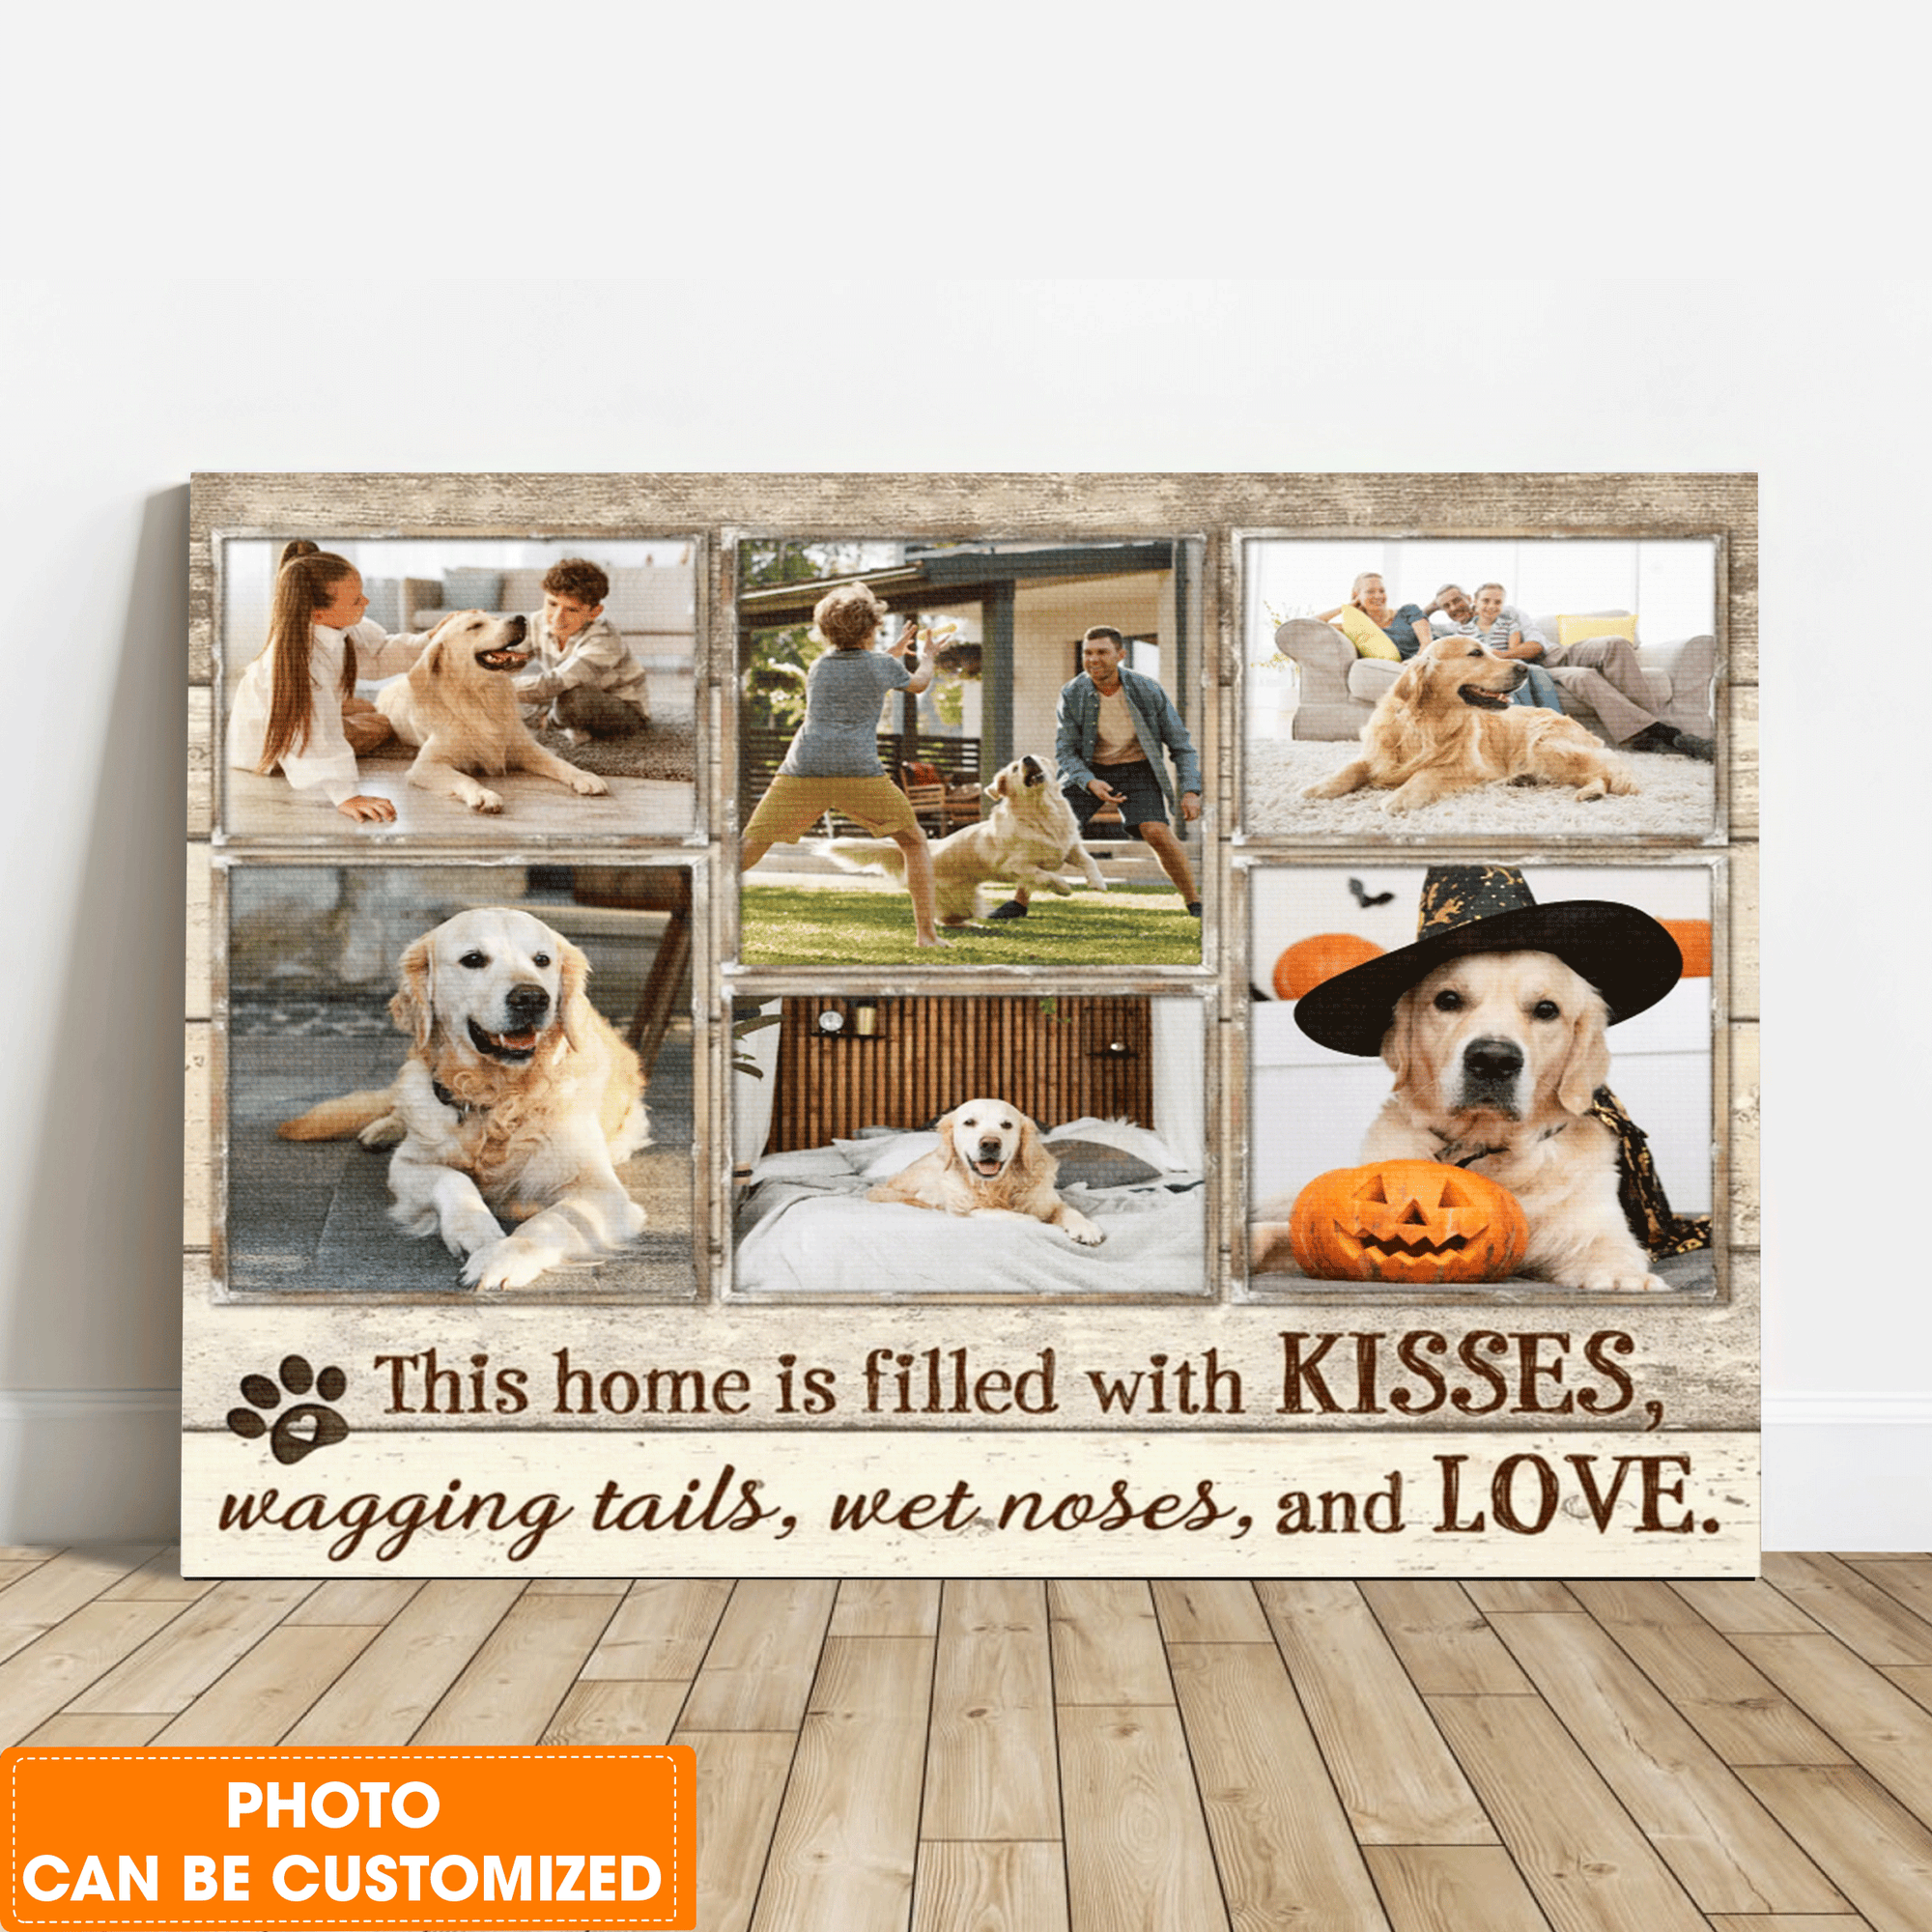 Personalized Dog Landscape Canvas, Custom Pet Photo This home is filled with kisses Canvas, Perfect Gift For Dog Lovers, Friend, Family